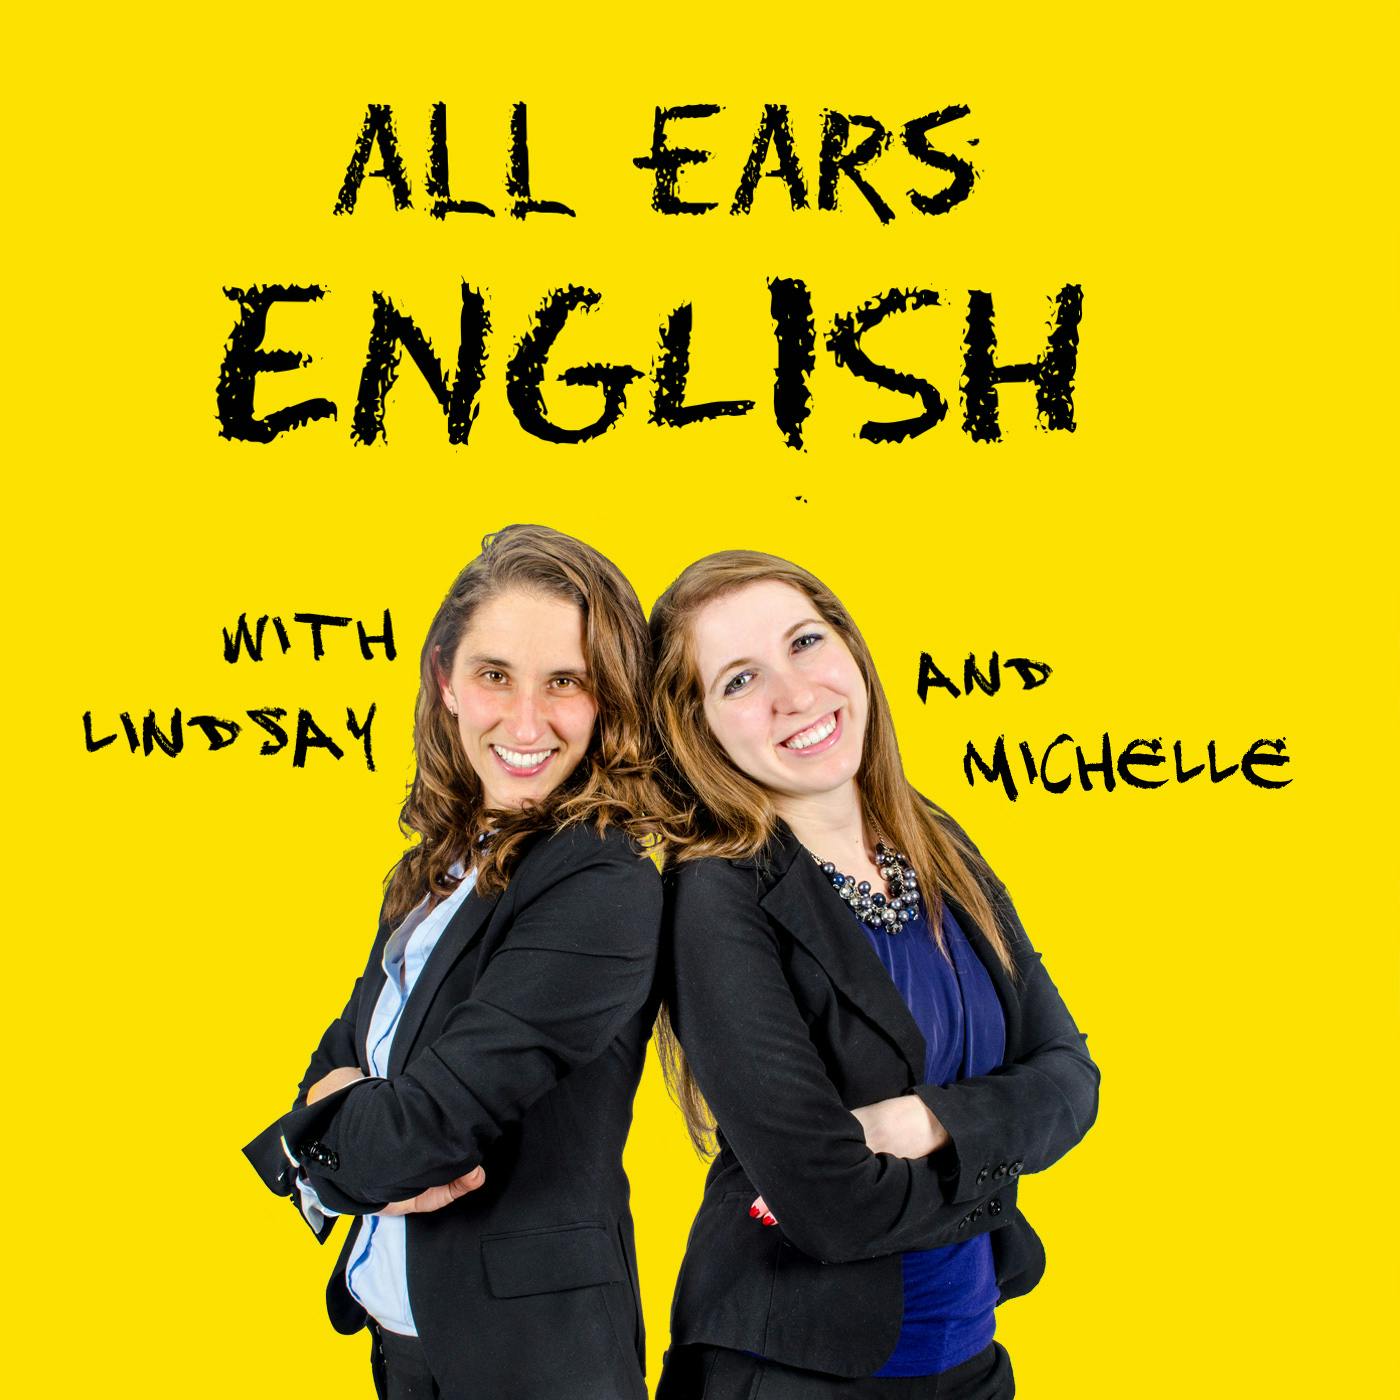 AEE 1578: One English Expression to Show Someone You Know Them Well